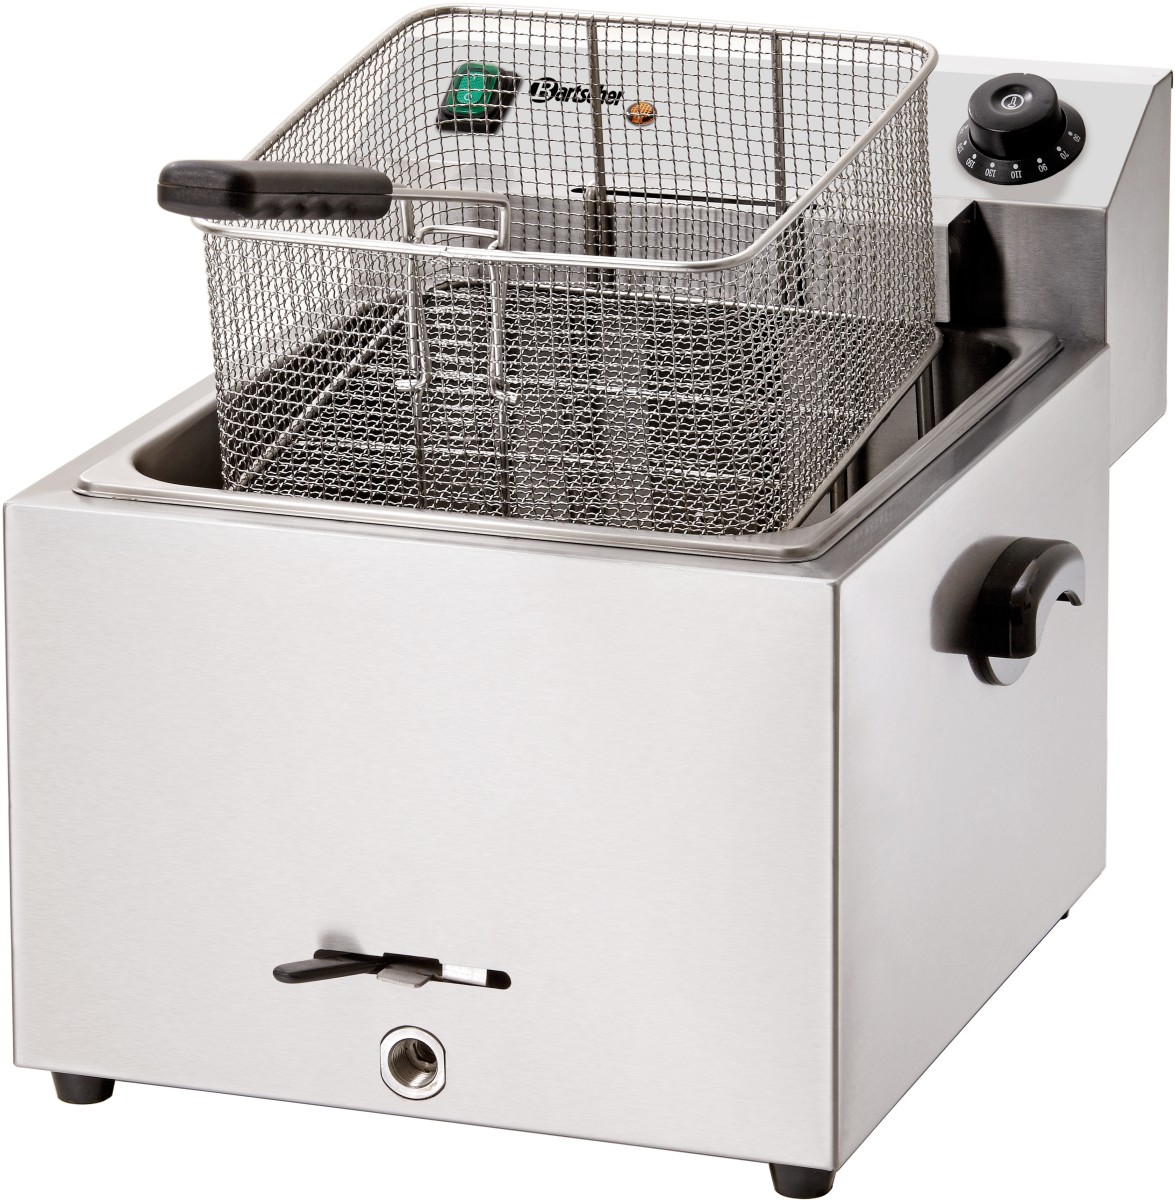  Bartscher Friteuse Imbiss Pro, 10L, AT 